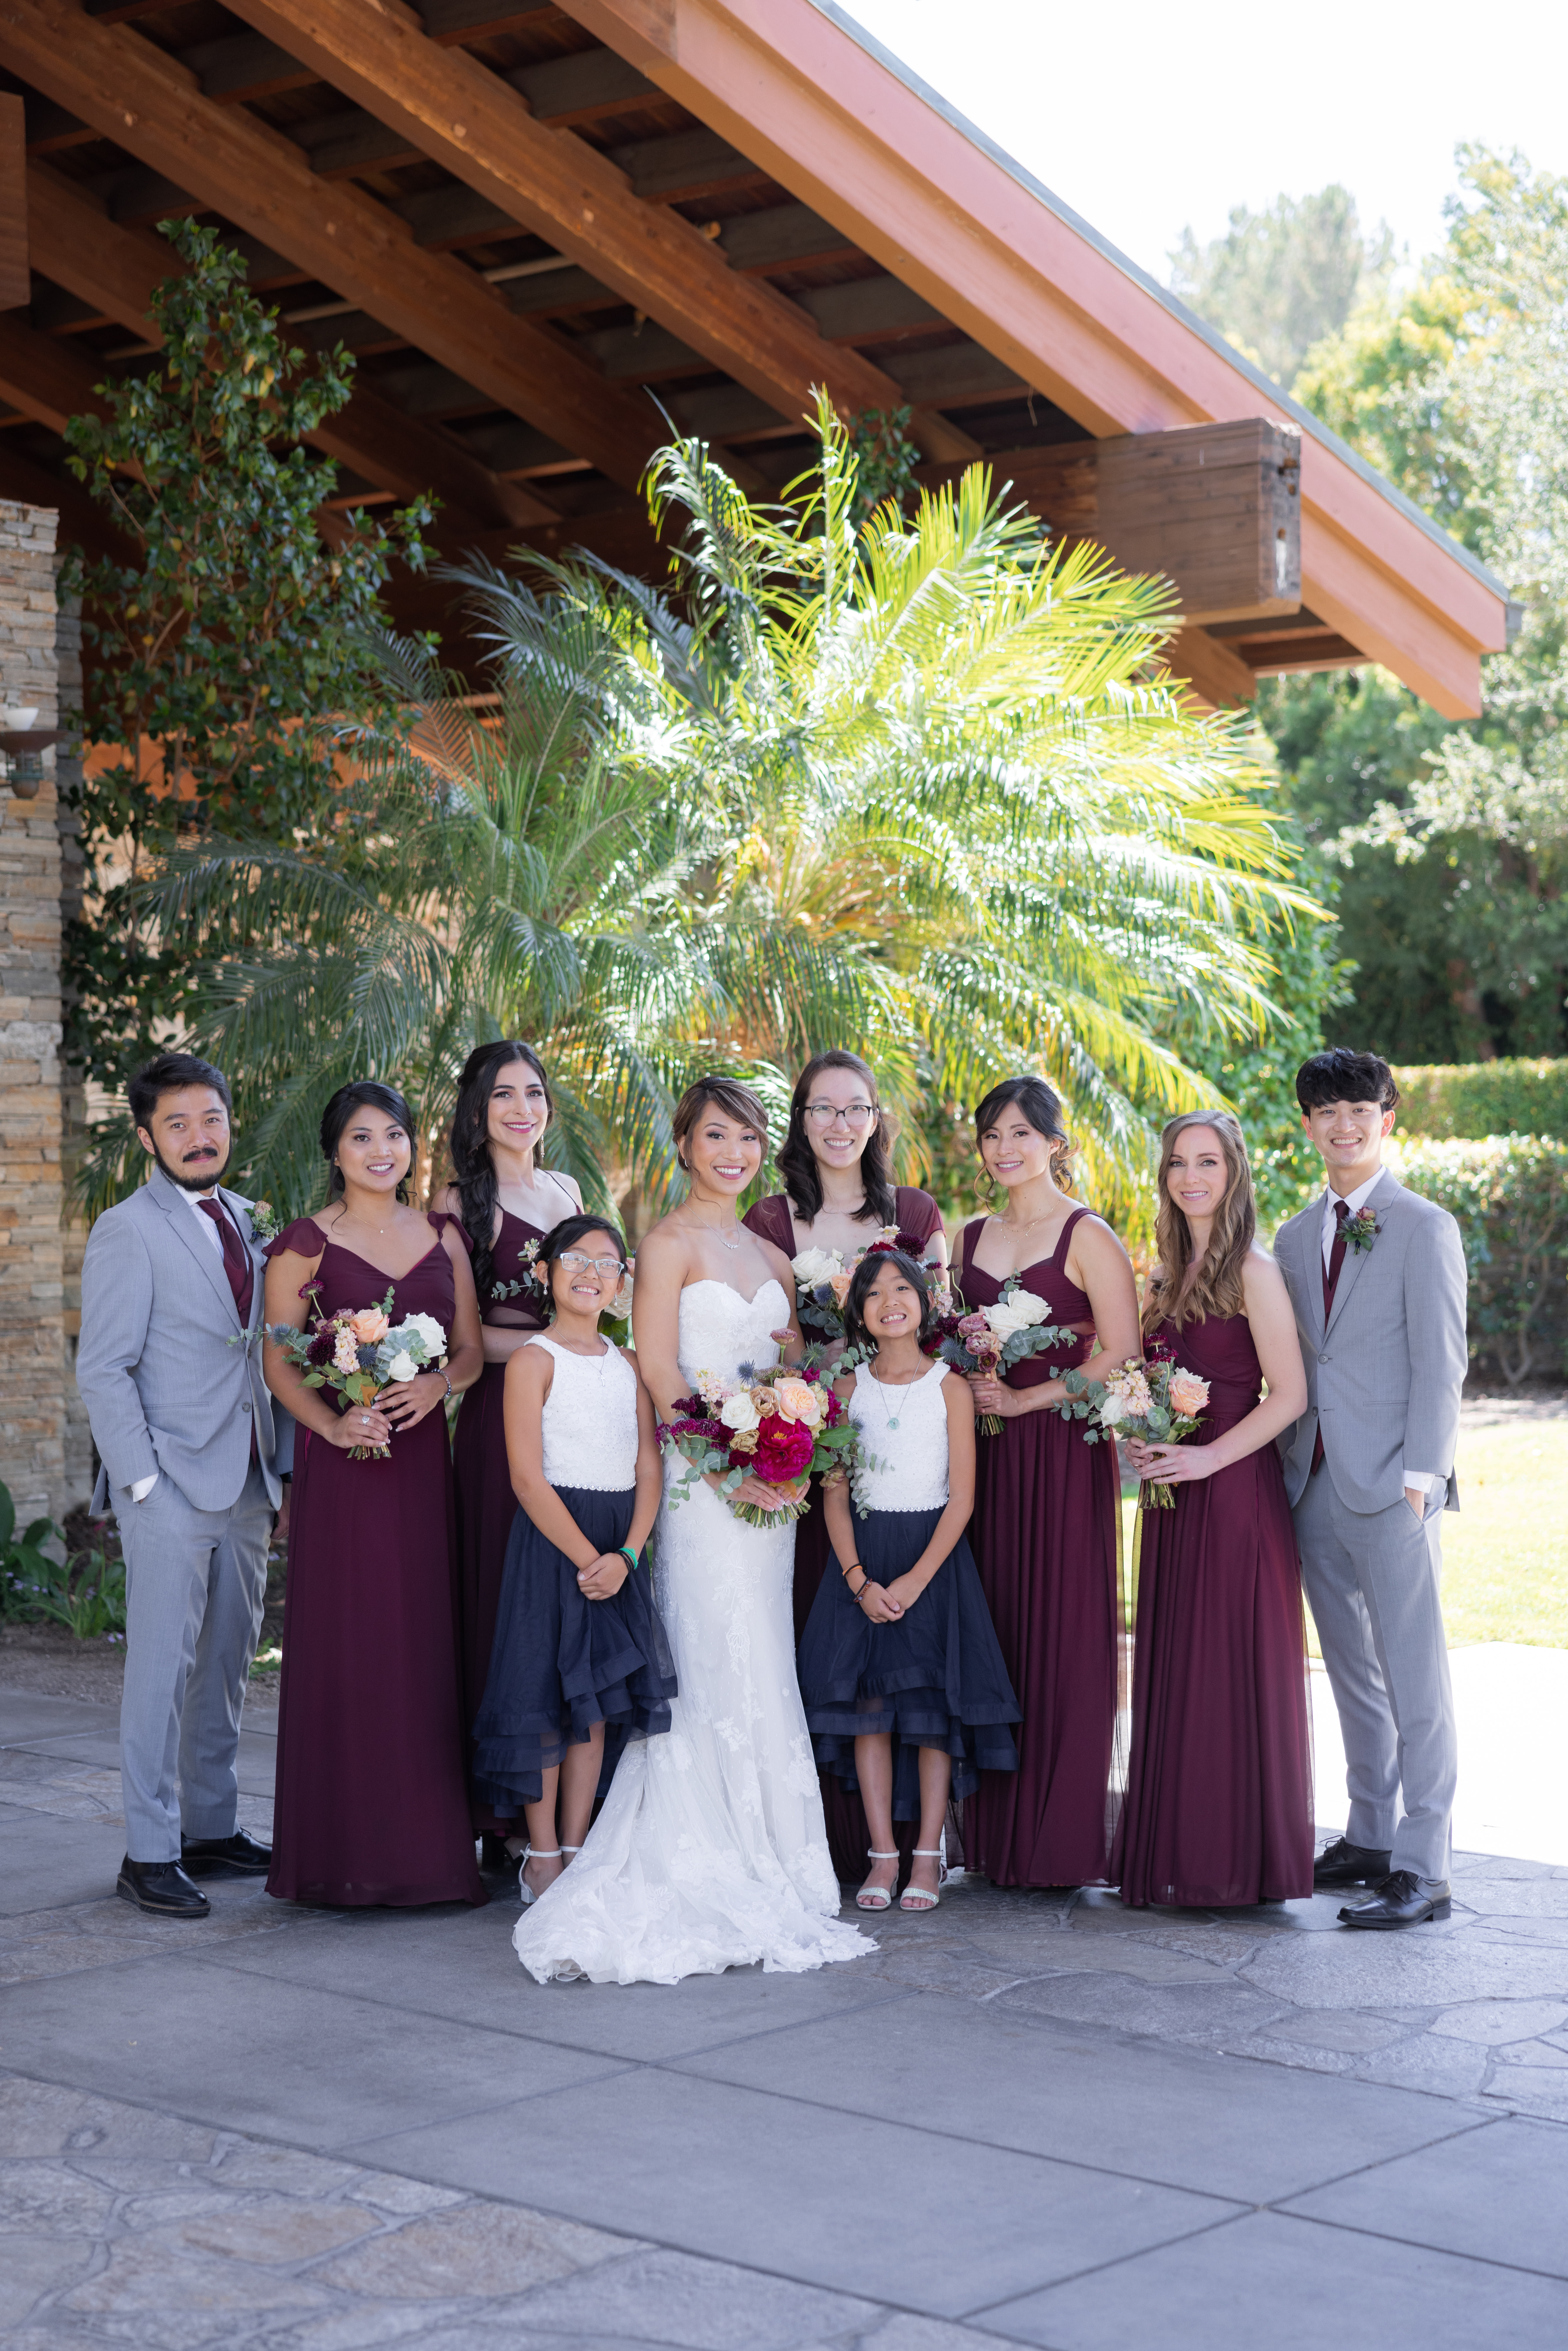 bride in strapless wedding dress and jewel toned bridal bouquet stand with co-ed wedding party wearing maroon 